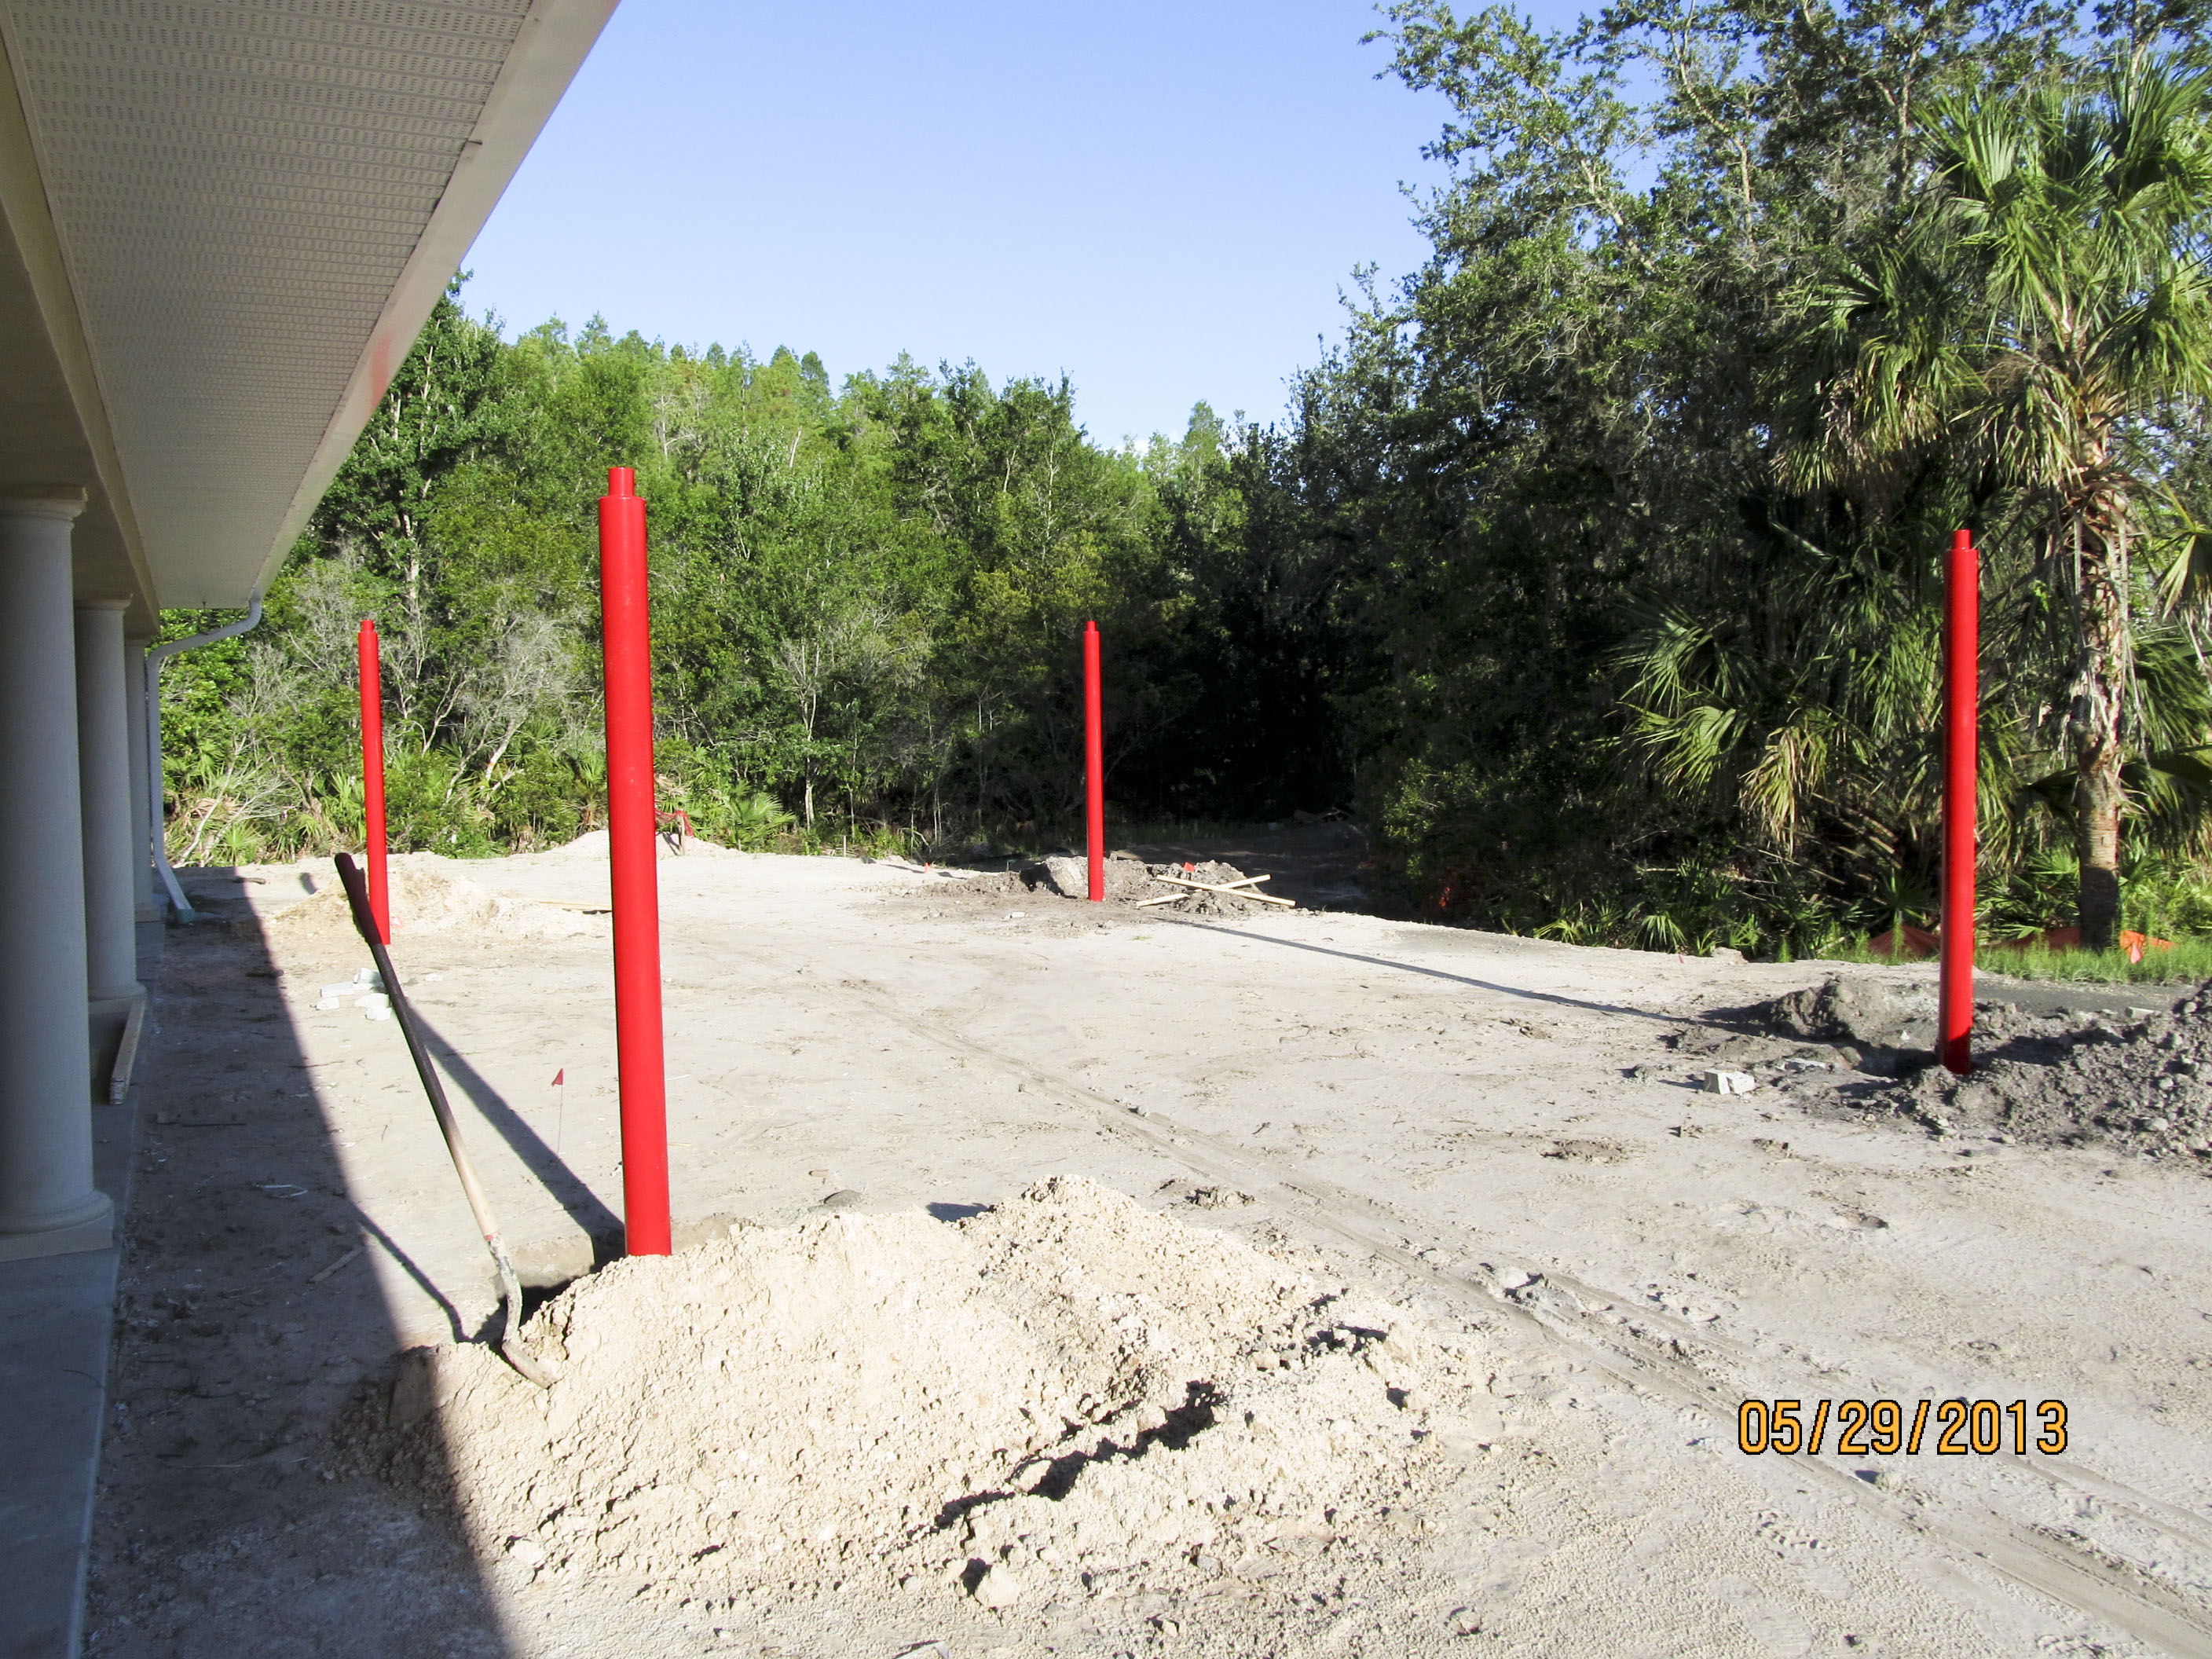    Posts are placed for the playground awning. 